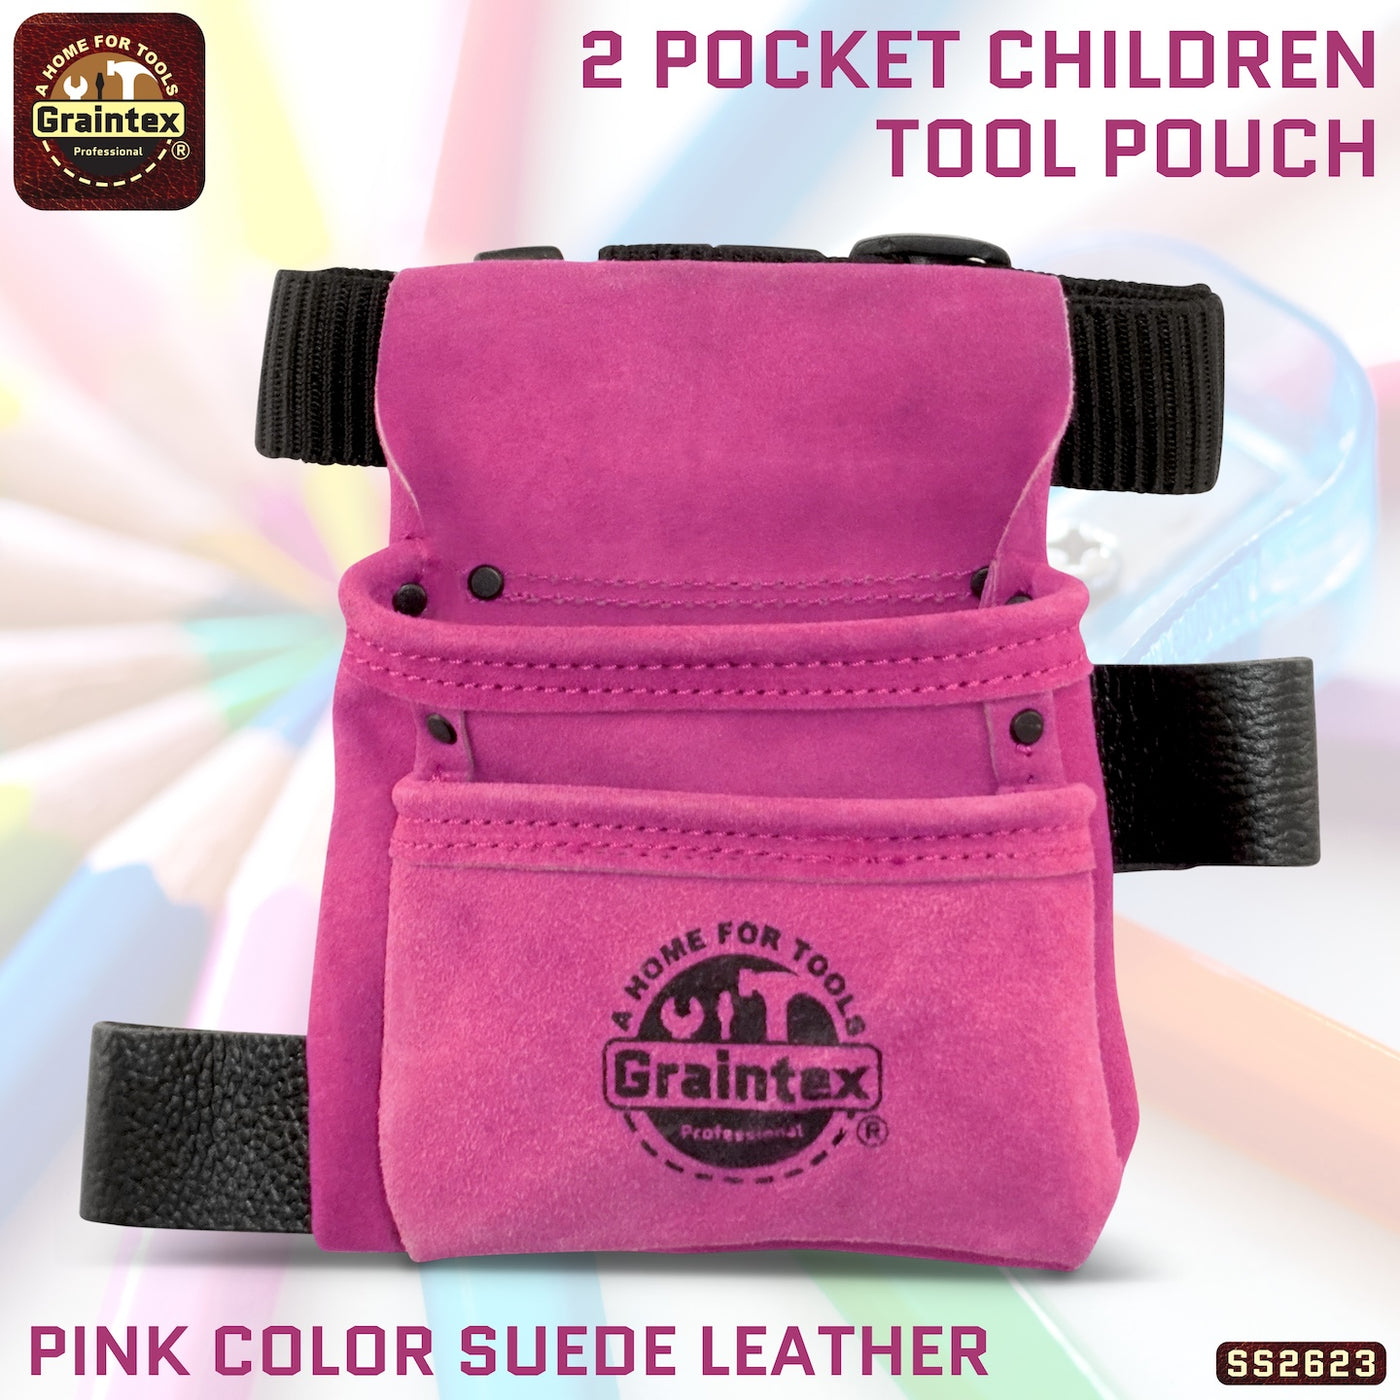 SS2623 :: 2 Pocket Children Tool Pouch Pink Color Suede Leather